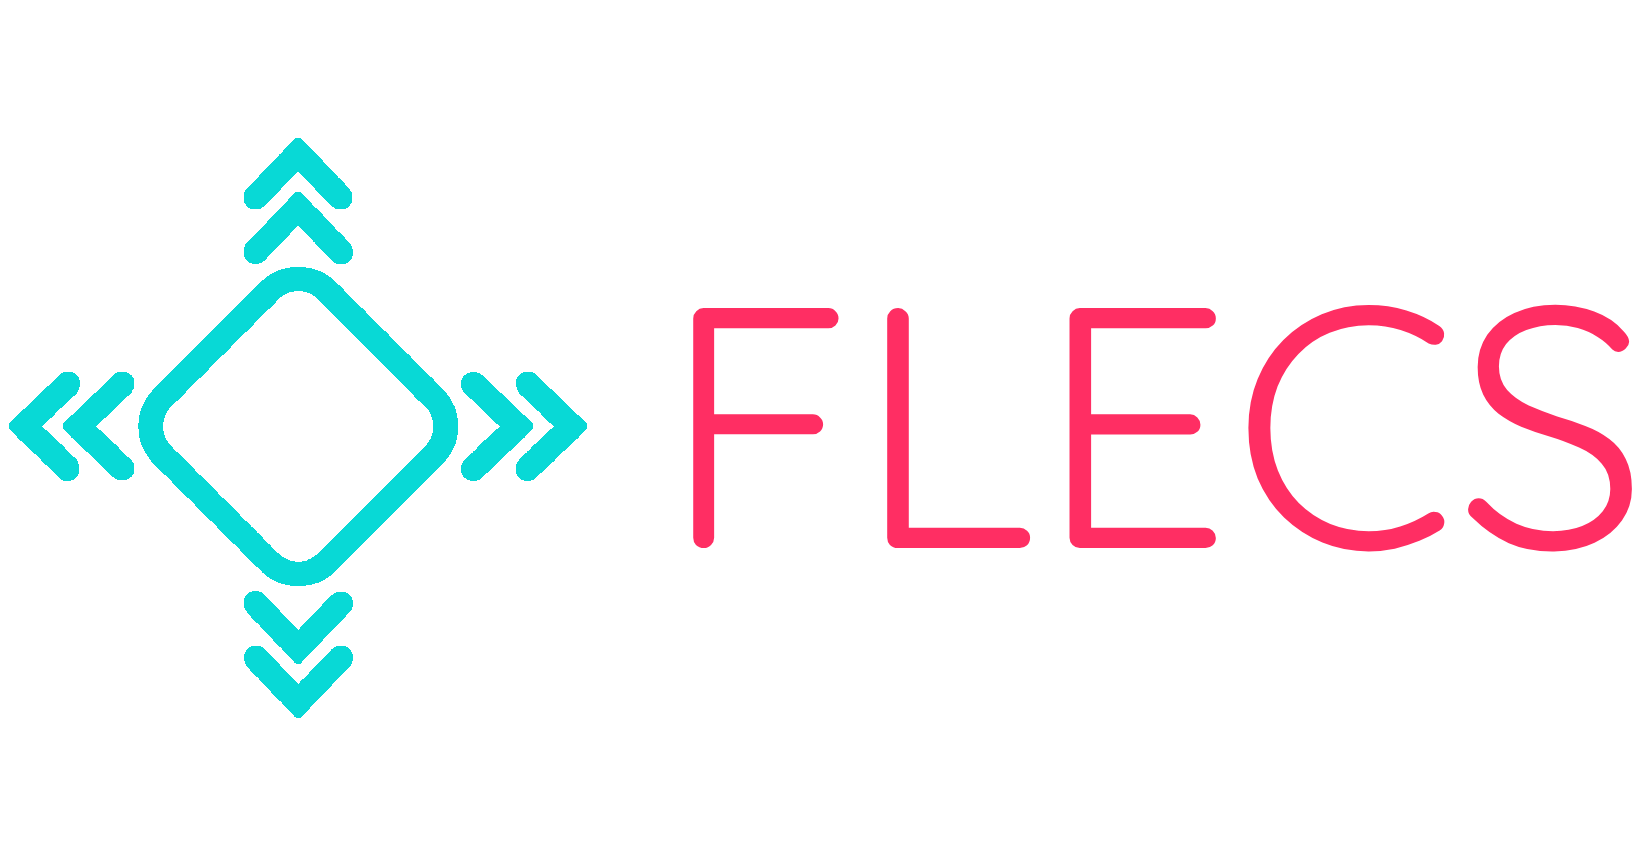 A dynamic duo for IoT excellence: FLECS and conplement offer pioneering solutions for secure and flexible IoT device management - FLECS